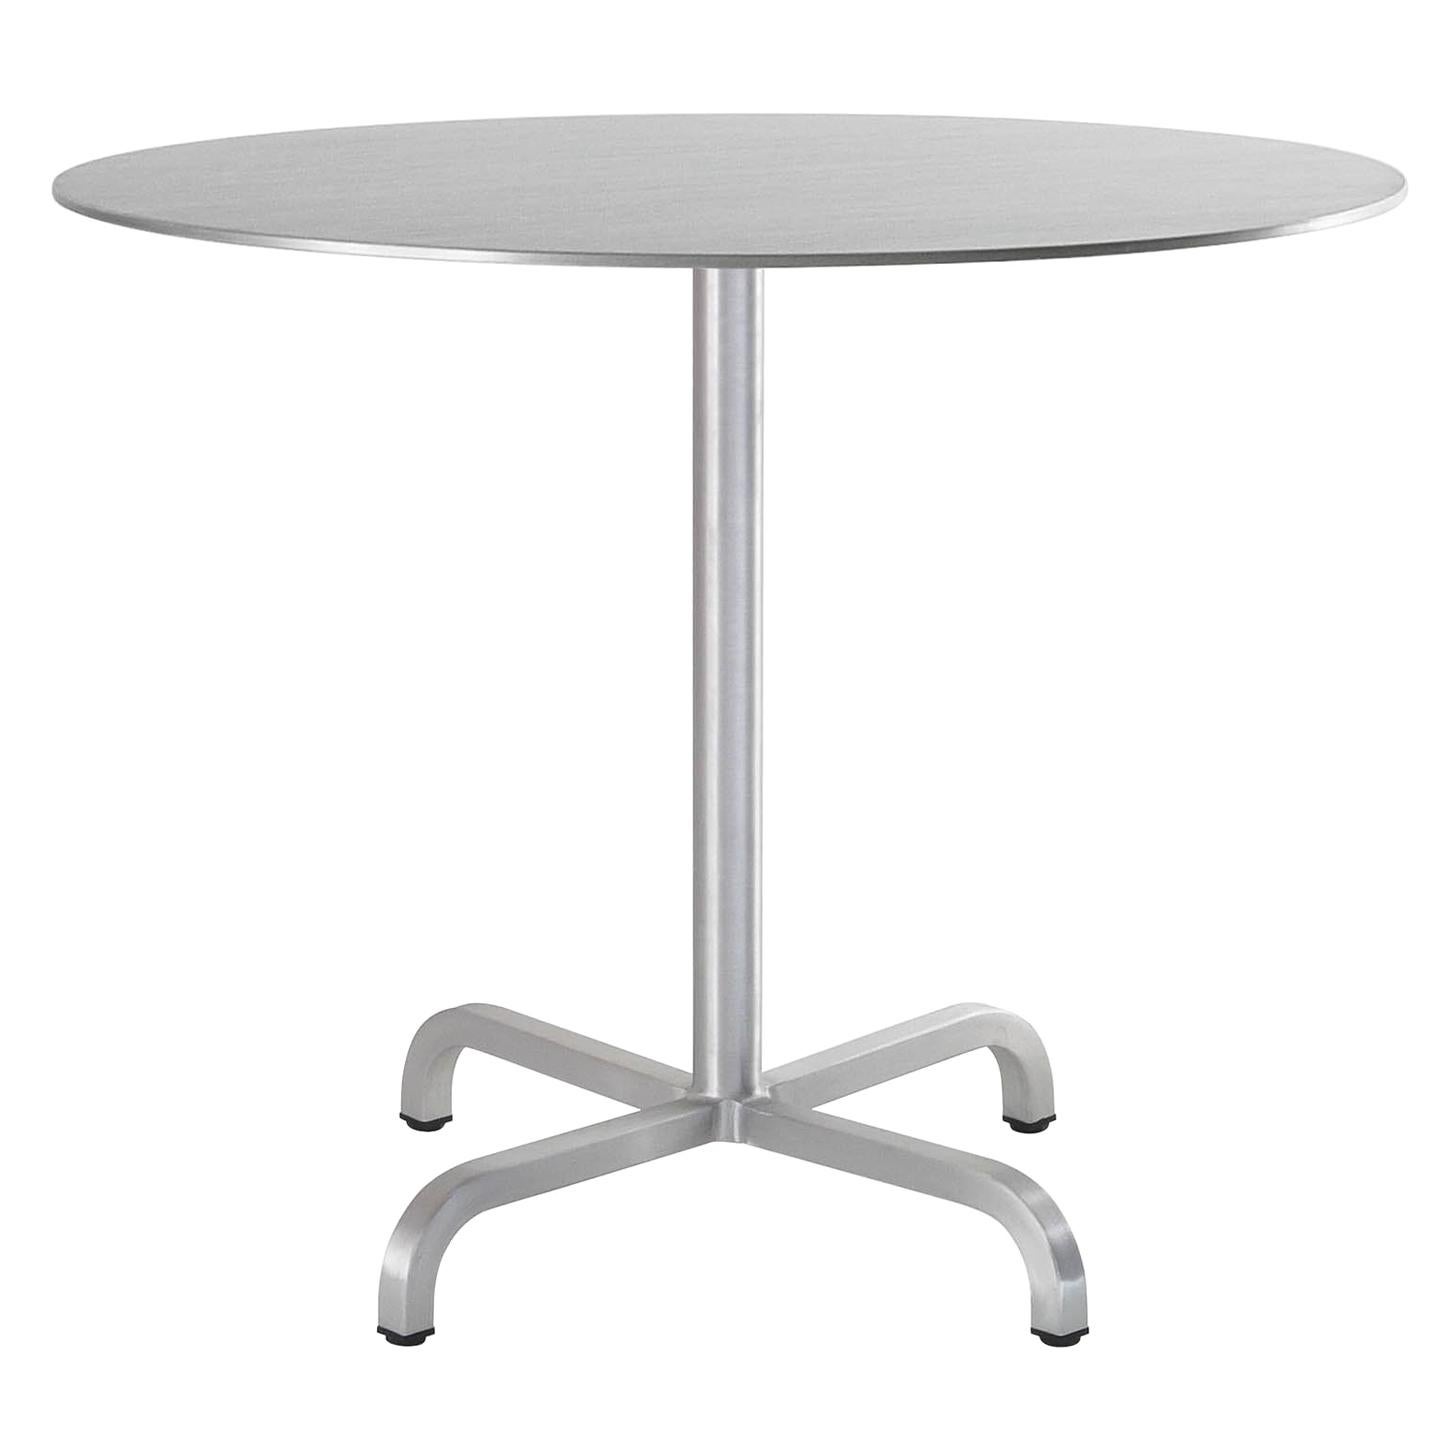 Emeco 20-06 Large Round Café Table in Brushed Aluminum by Norman Foster